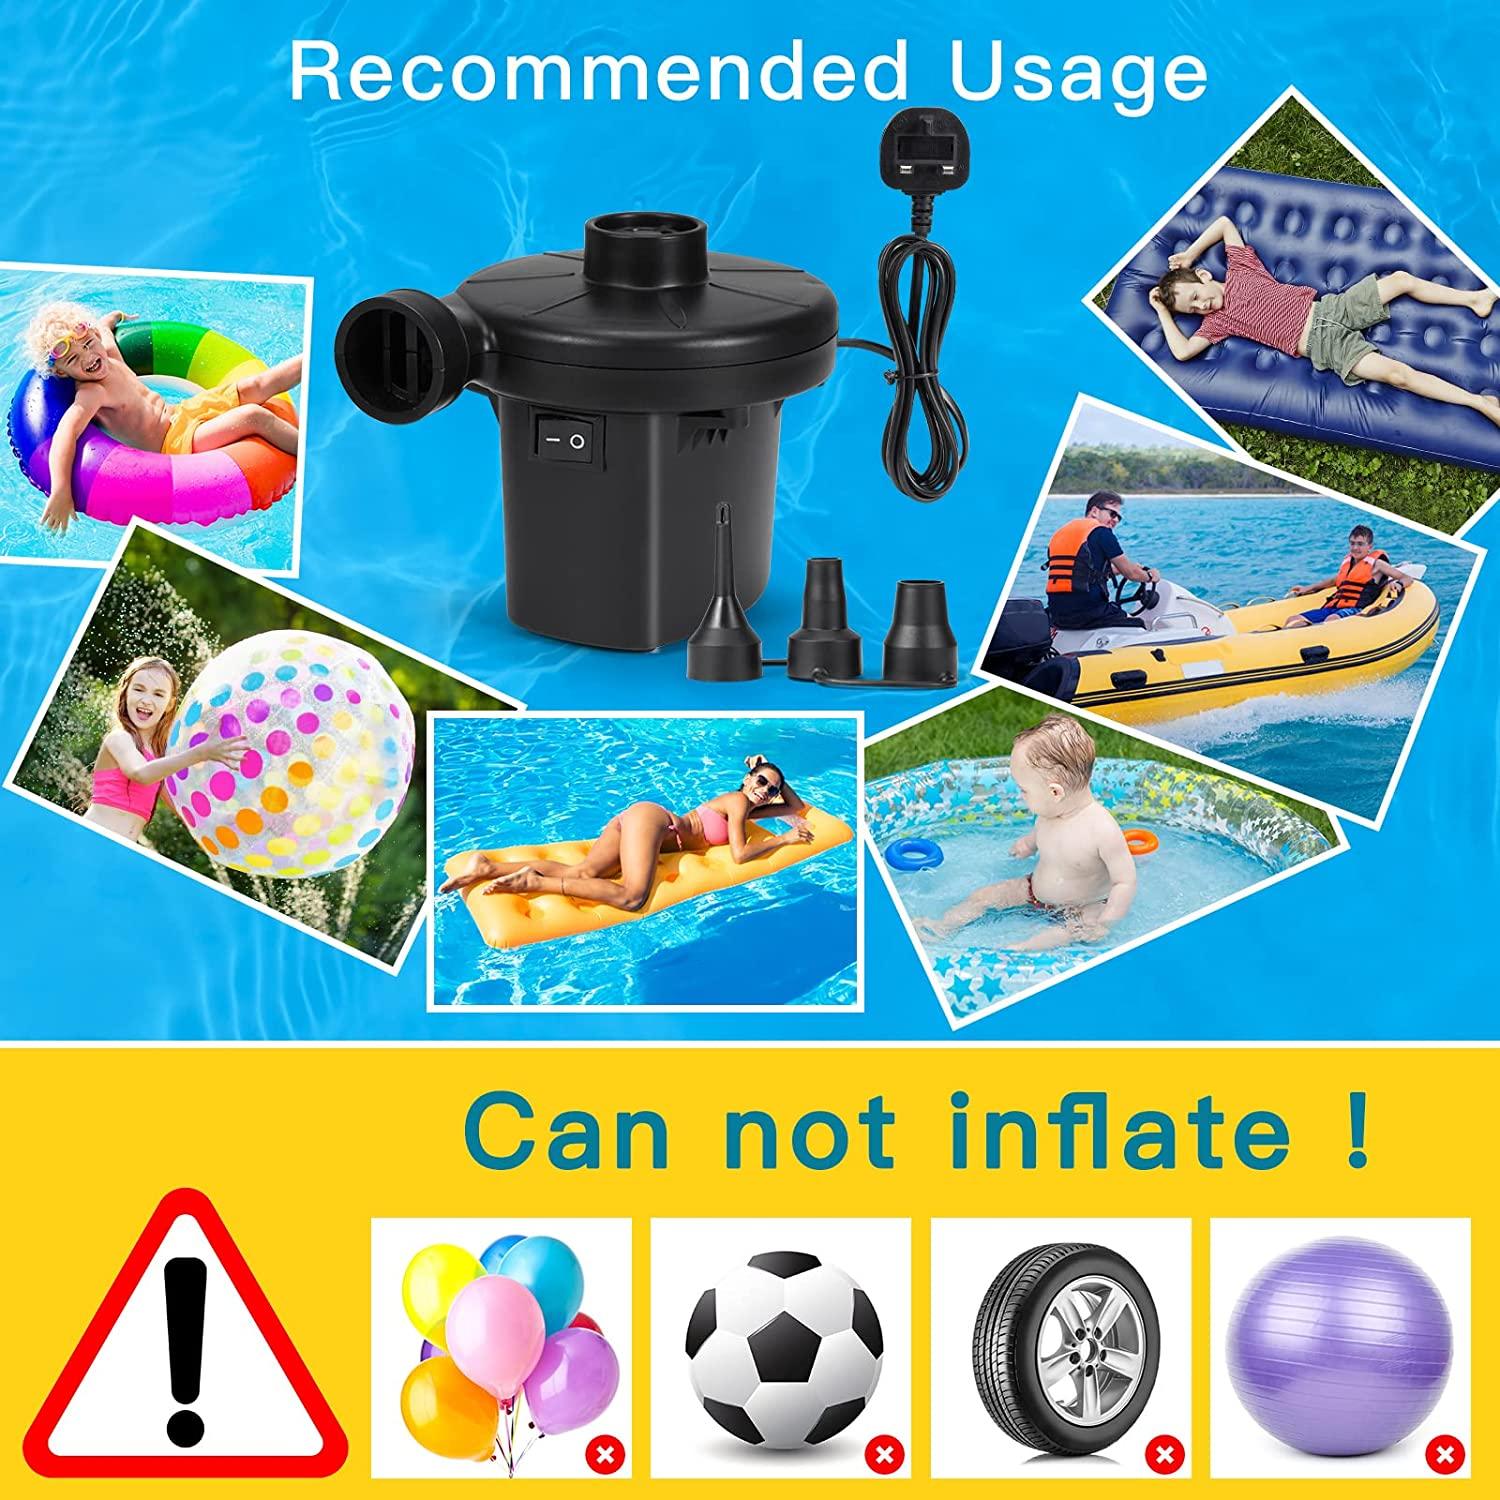 Electric Air Pump for Inflatables, Air Pump Air Mattress Pump with 3 Nozzles Inflator/Deflator Quick Air Pump for Air Bed Paddling Pool Toy Raft Boat Swimming Ring Wintory